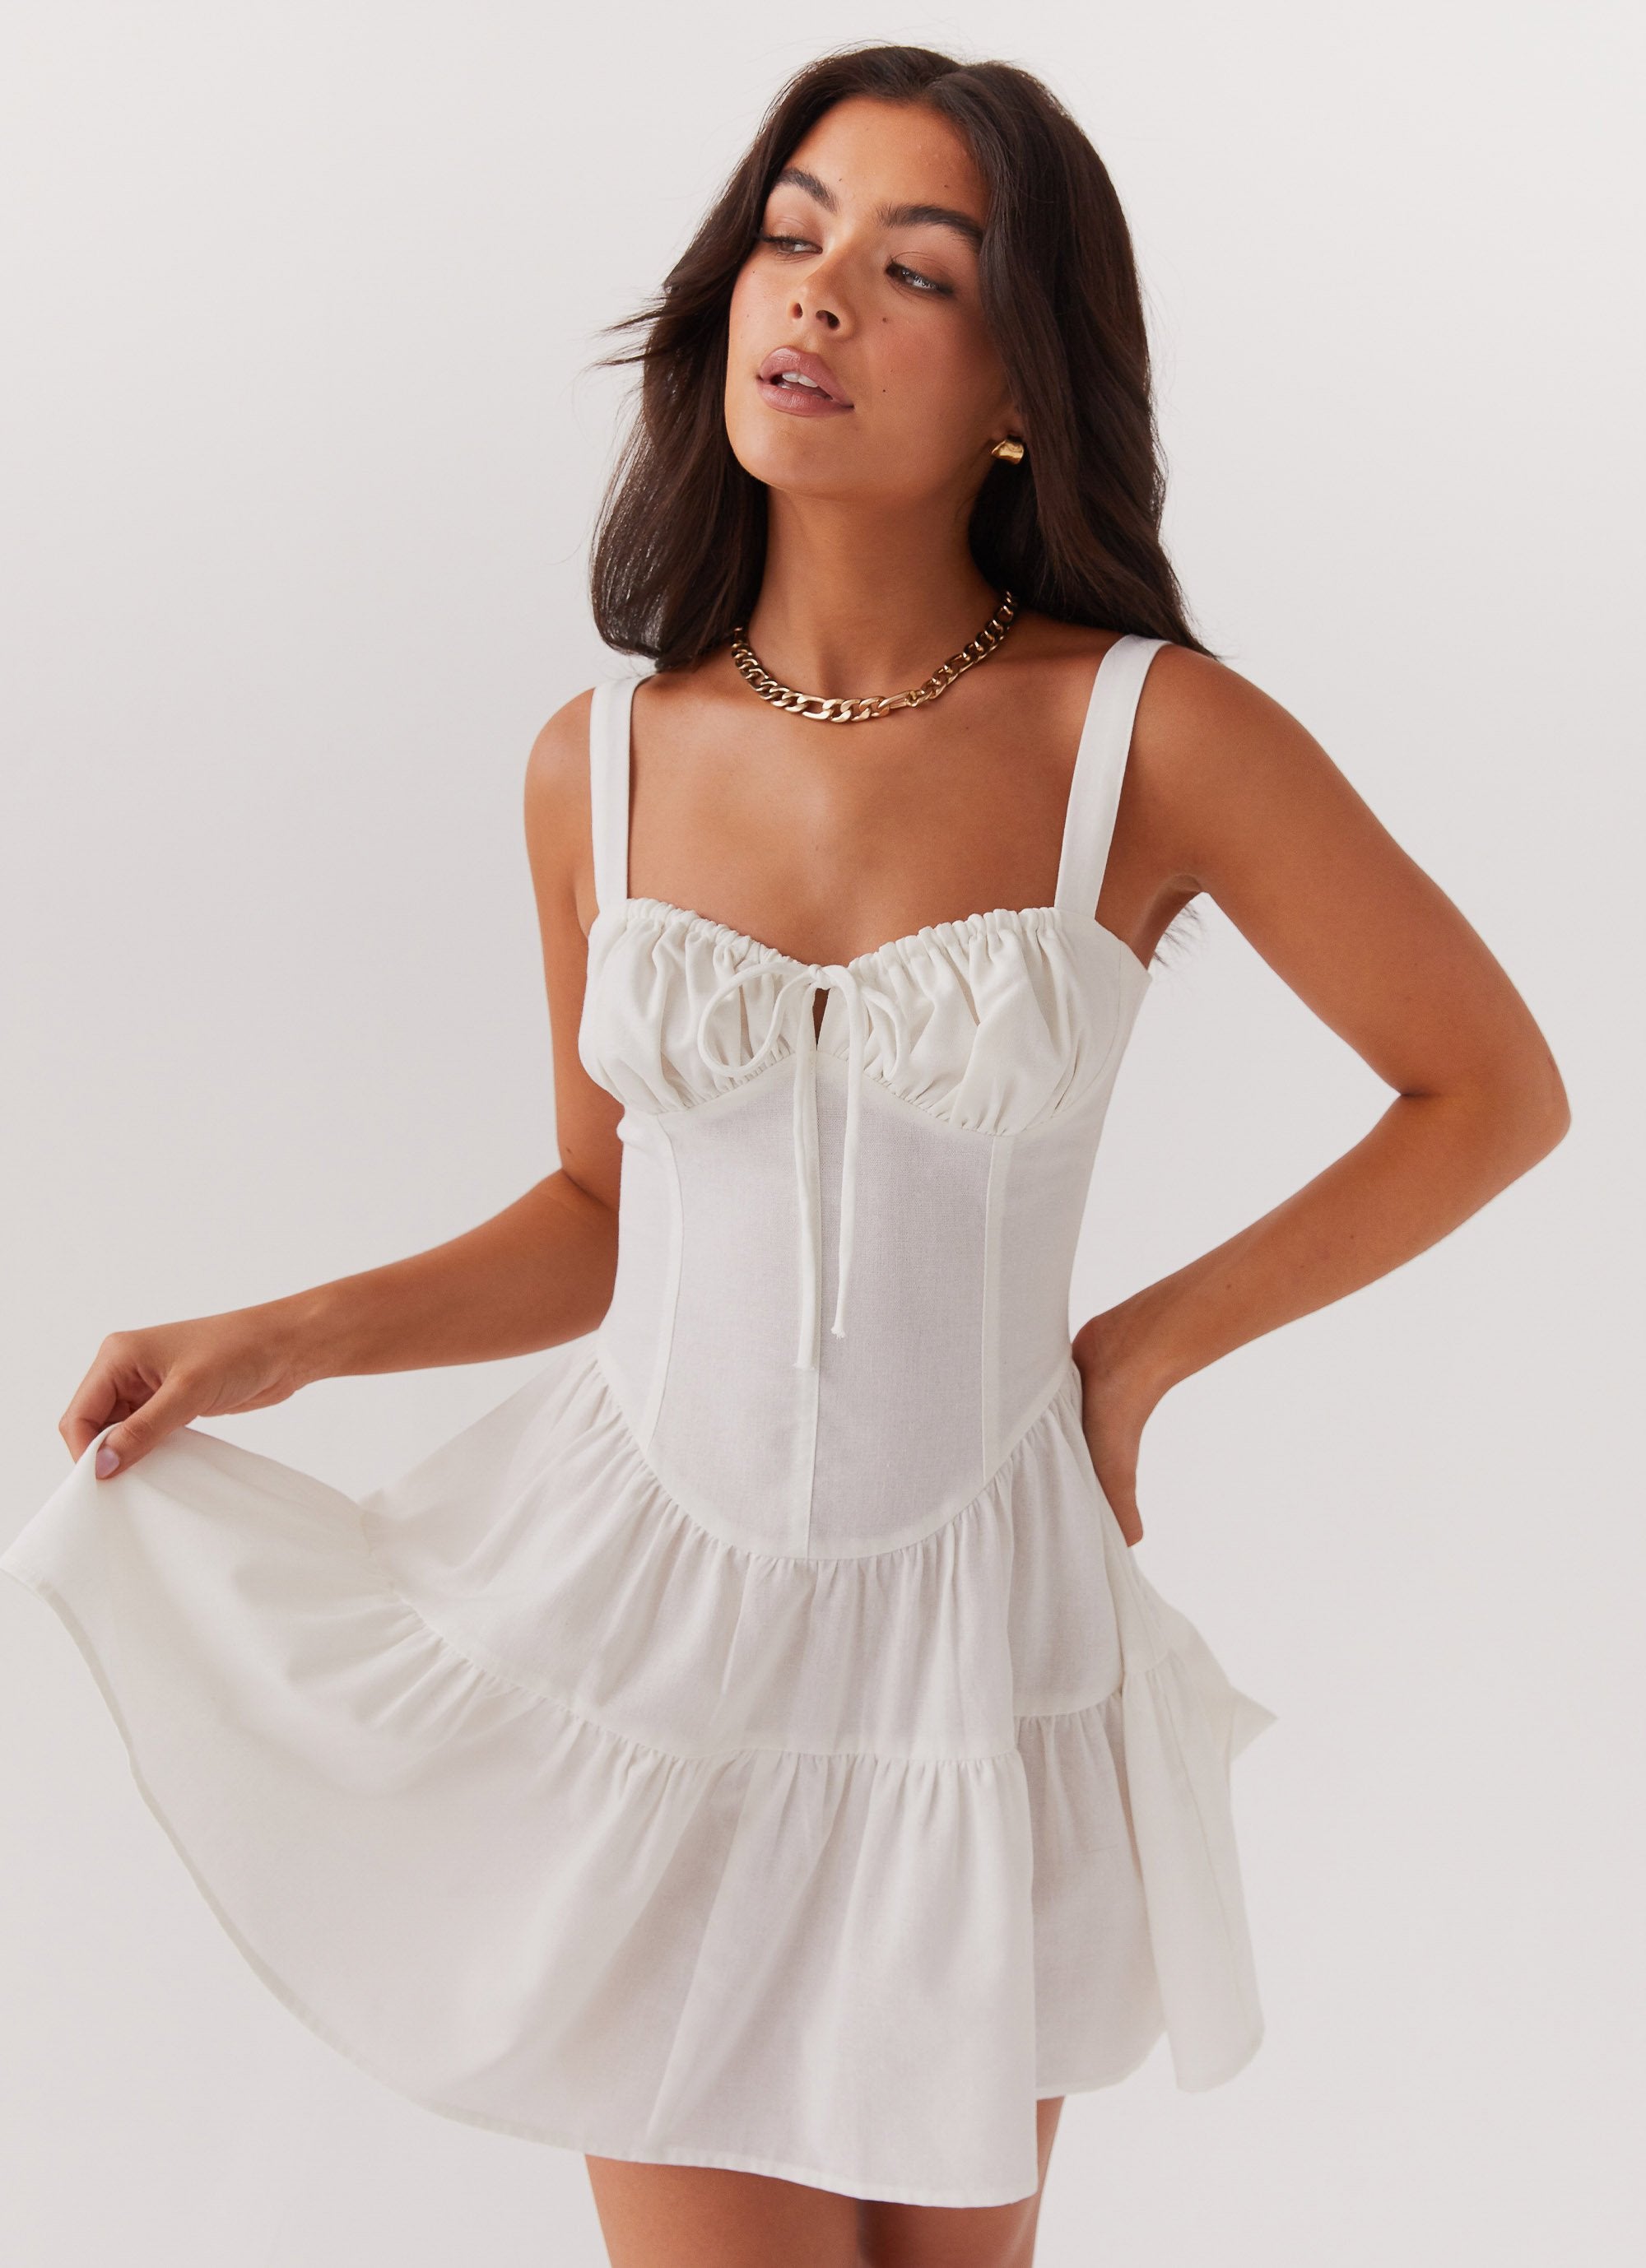 Dreams of You Ivory Lace Cutout Satin Lingerie Slip